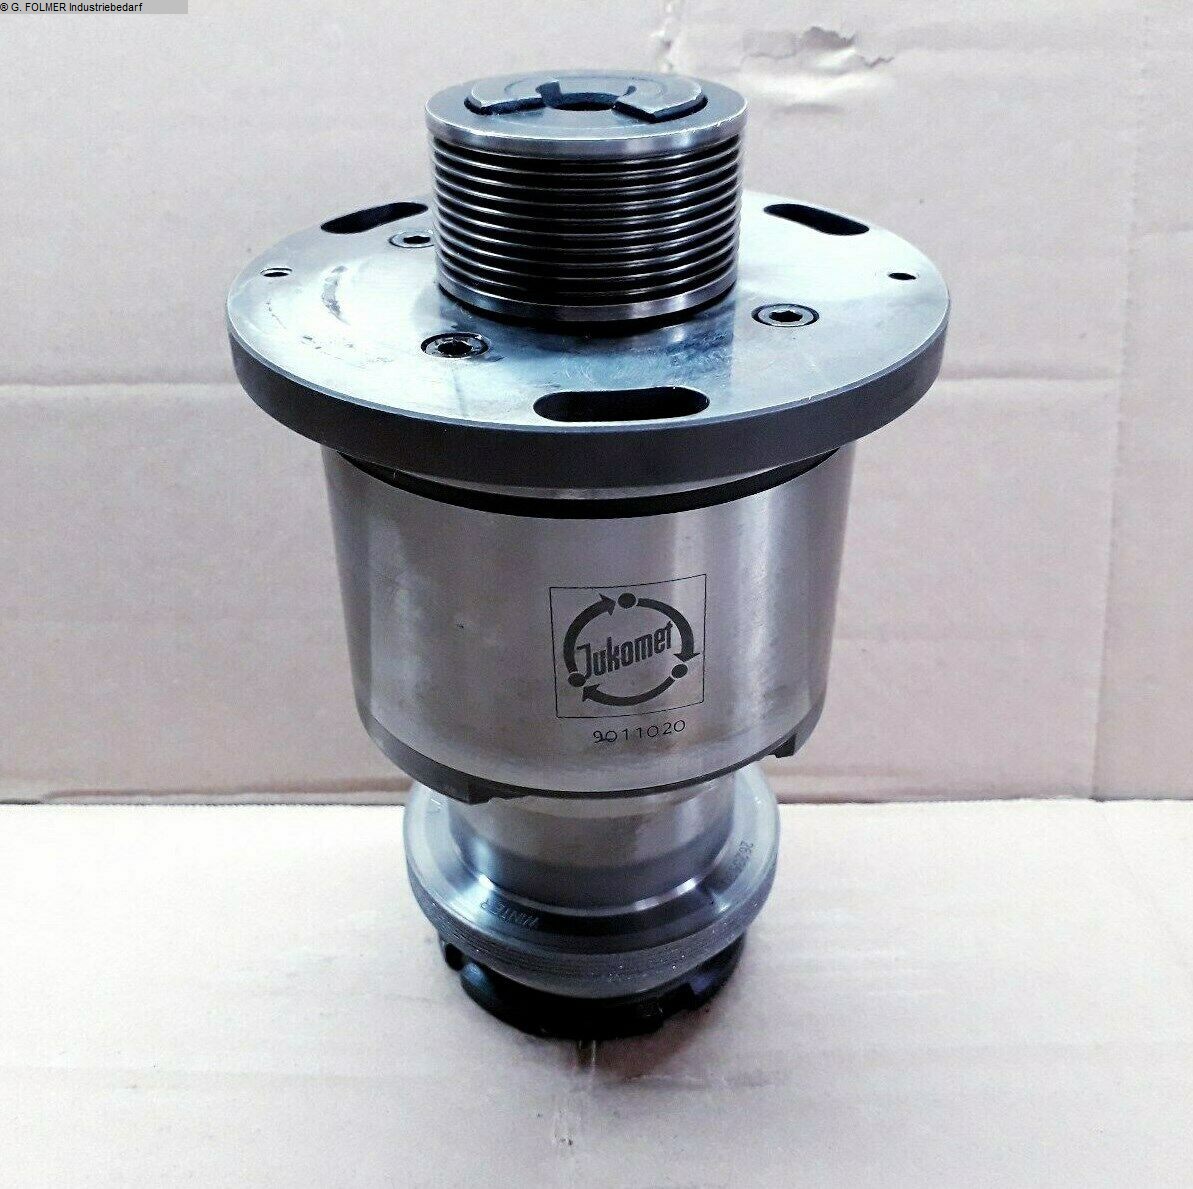 used Other accessories for machine tools High-frequency-spindle JUNKER Jukomet 9011020